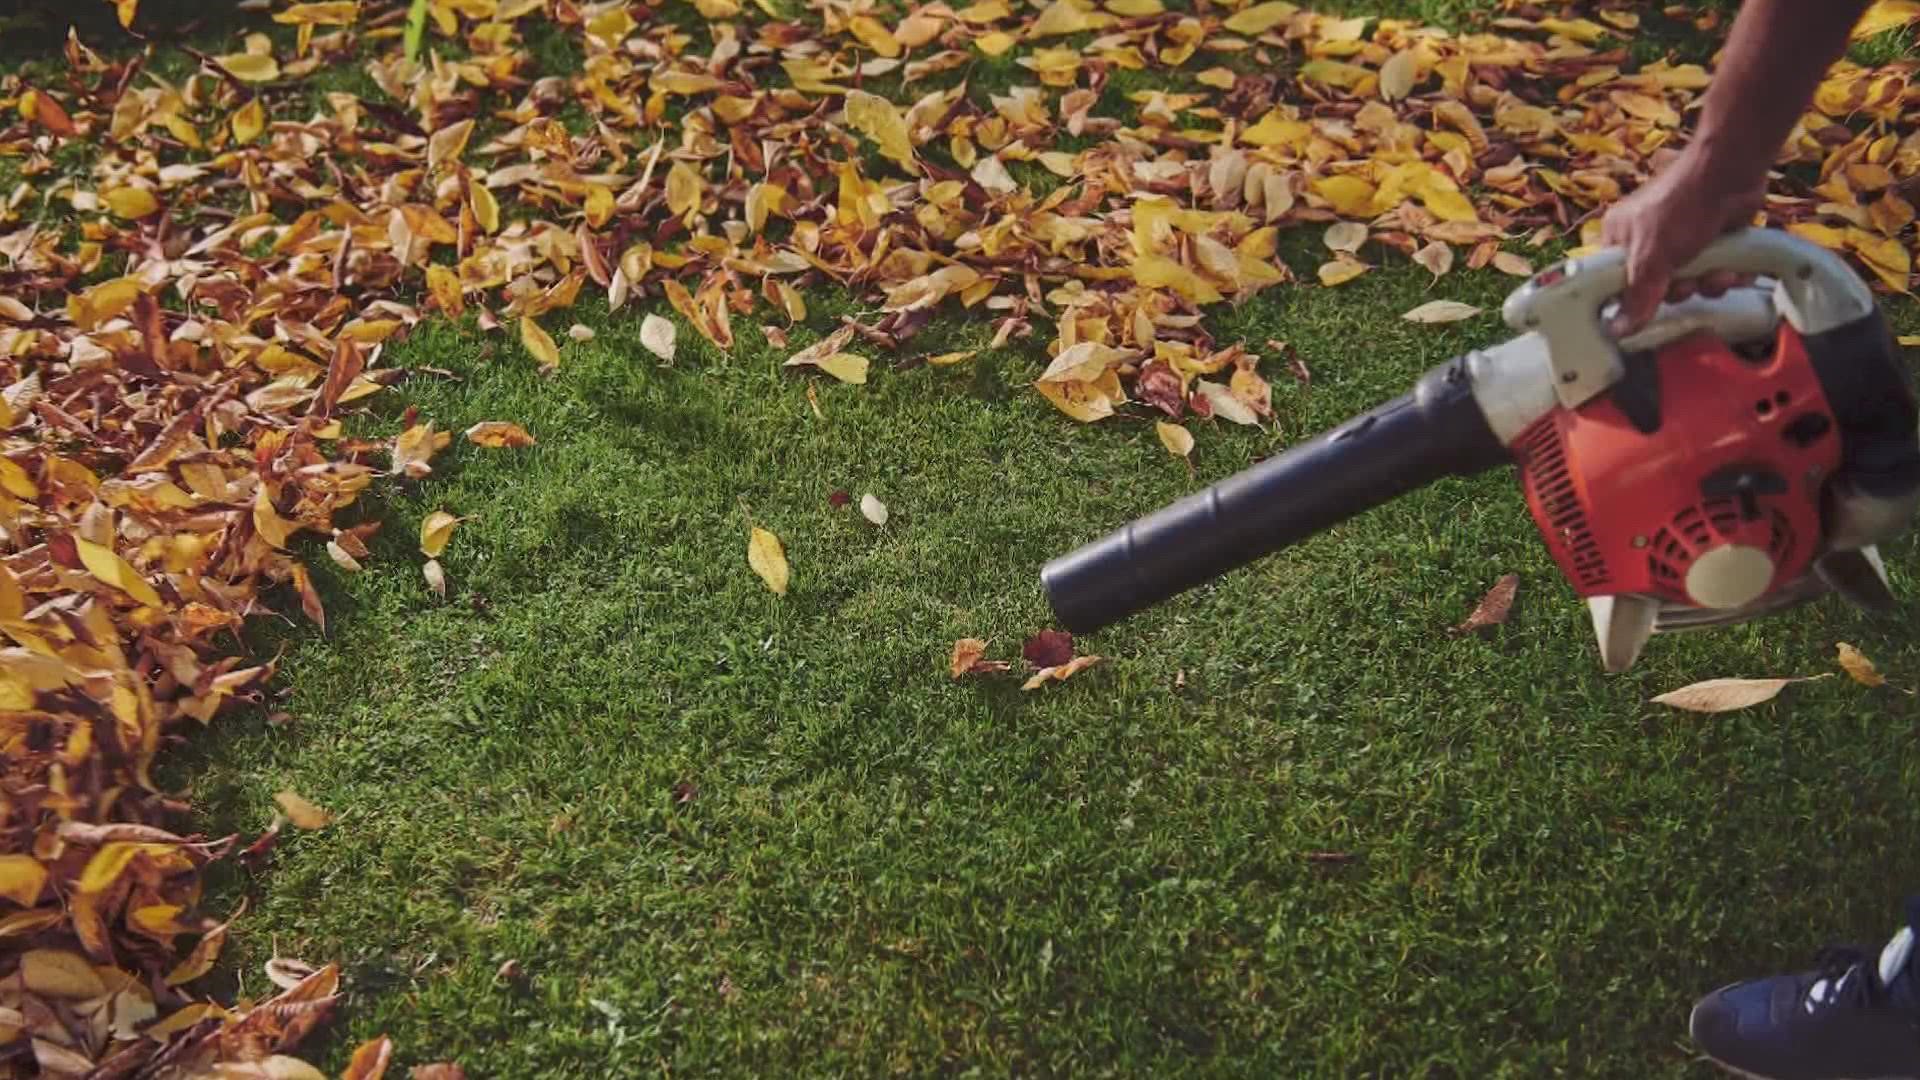 The resolution would phase out gas-powered leaf blowers in the city by 2025, then issue a complete ban by 2027.